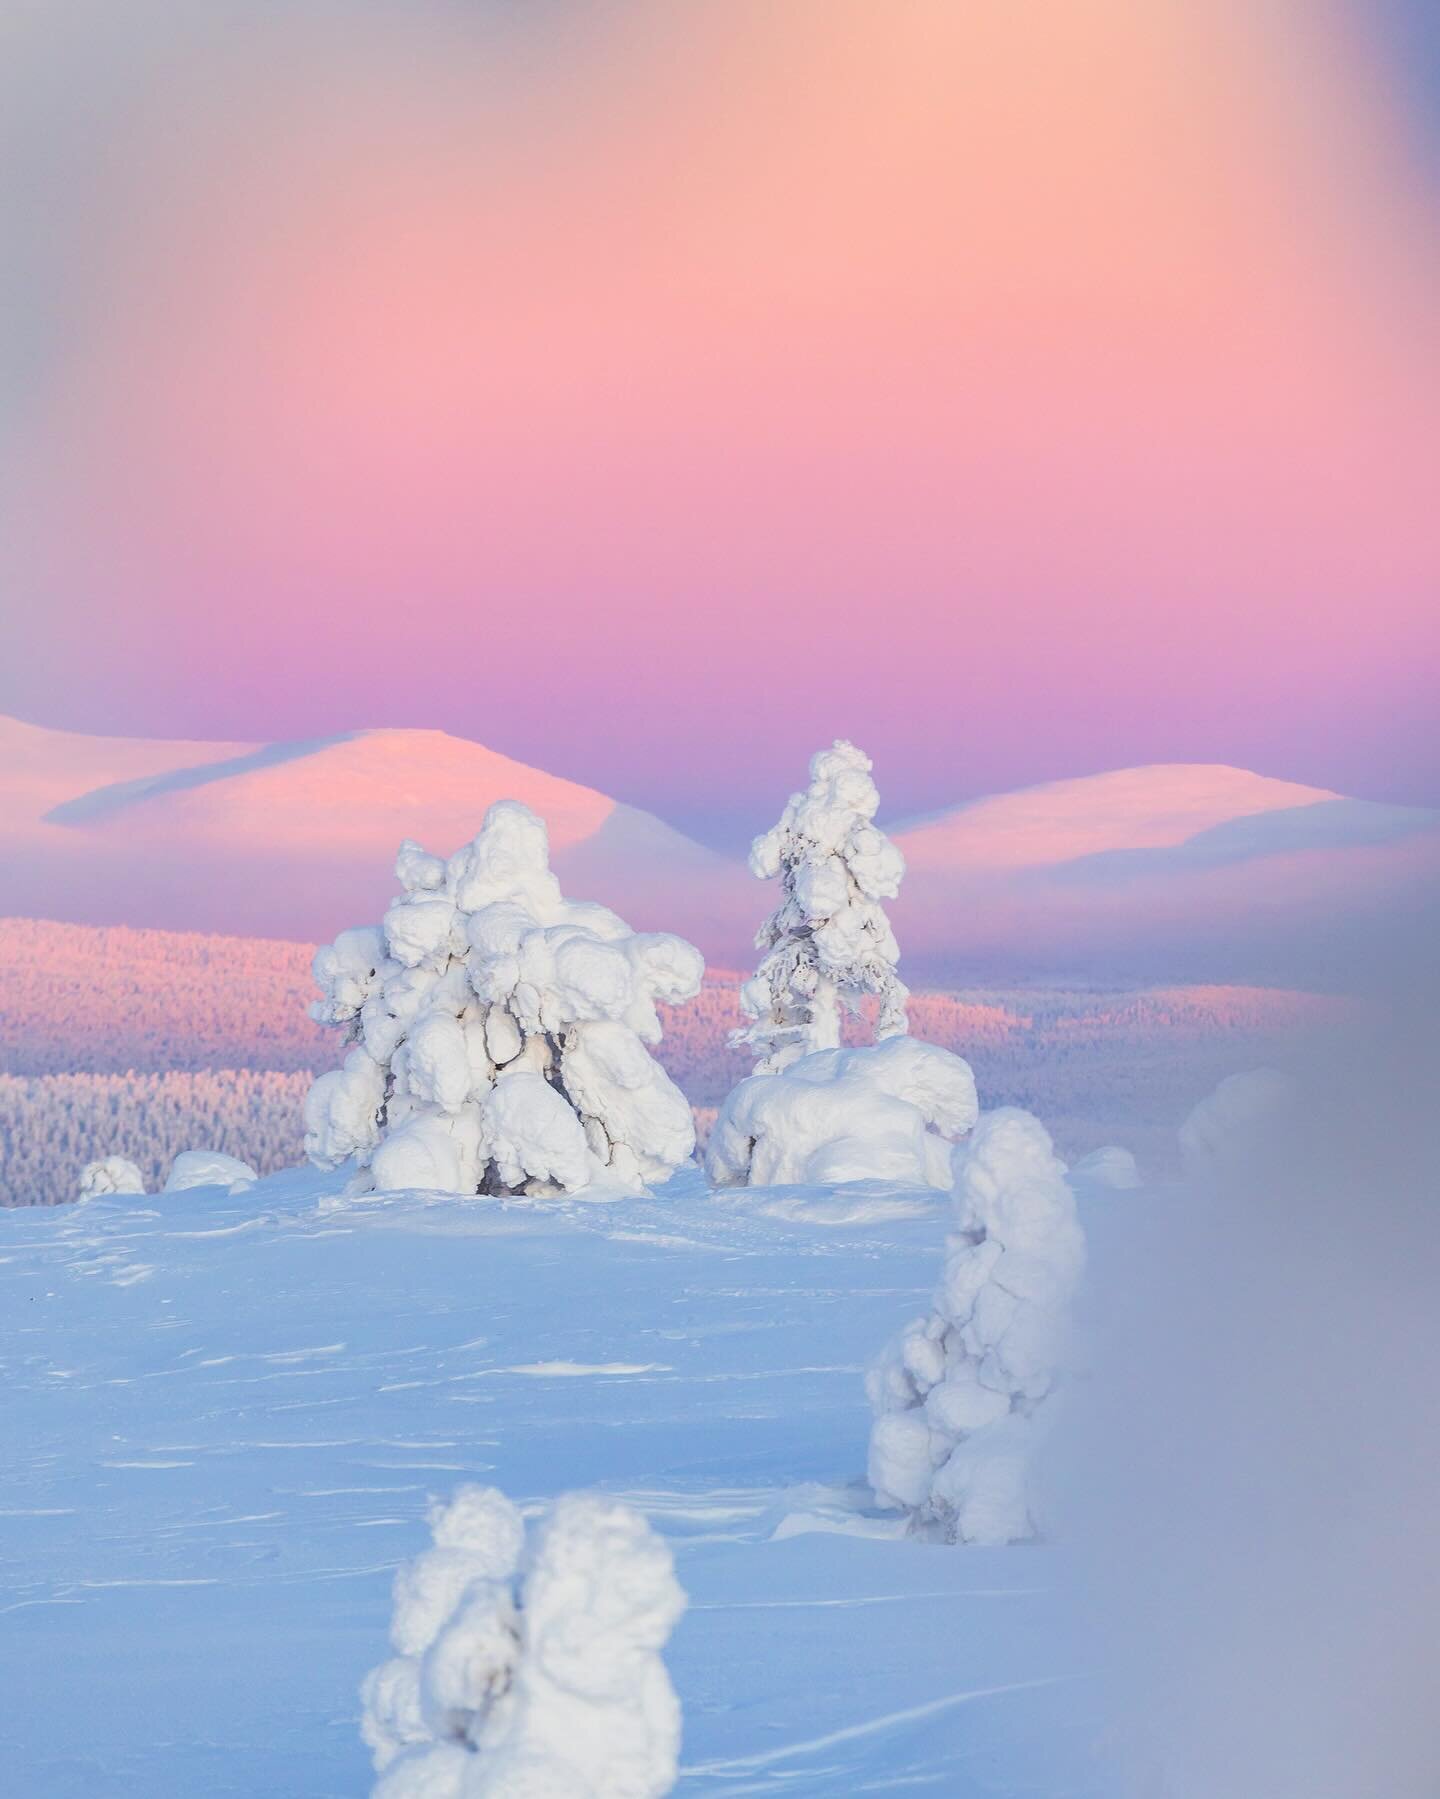 A walk in the pastel world ✨
May look gentle, but the frost bit in minutes 😅

#lapland #finland #muonio #lappi #stayandwander #canonnordic #ourplanetdaily #discoverearth #s&auml;rkitunturi